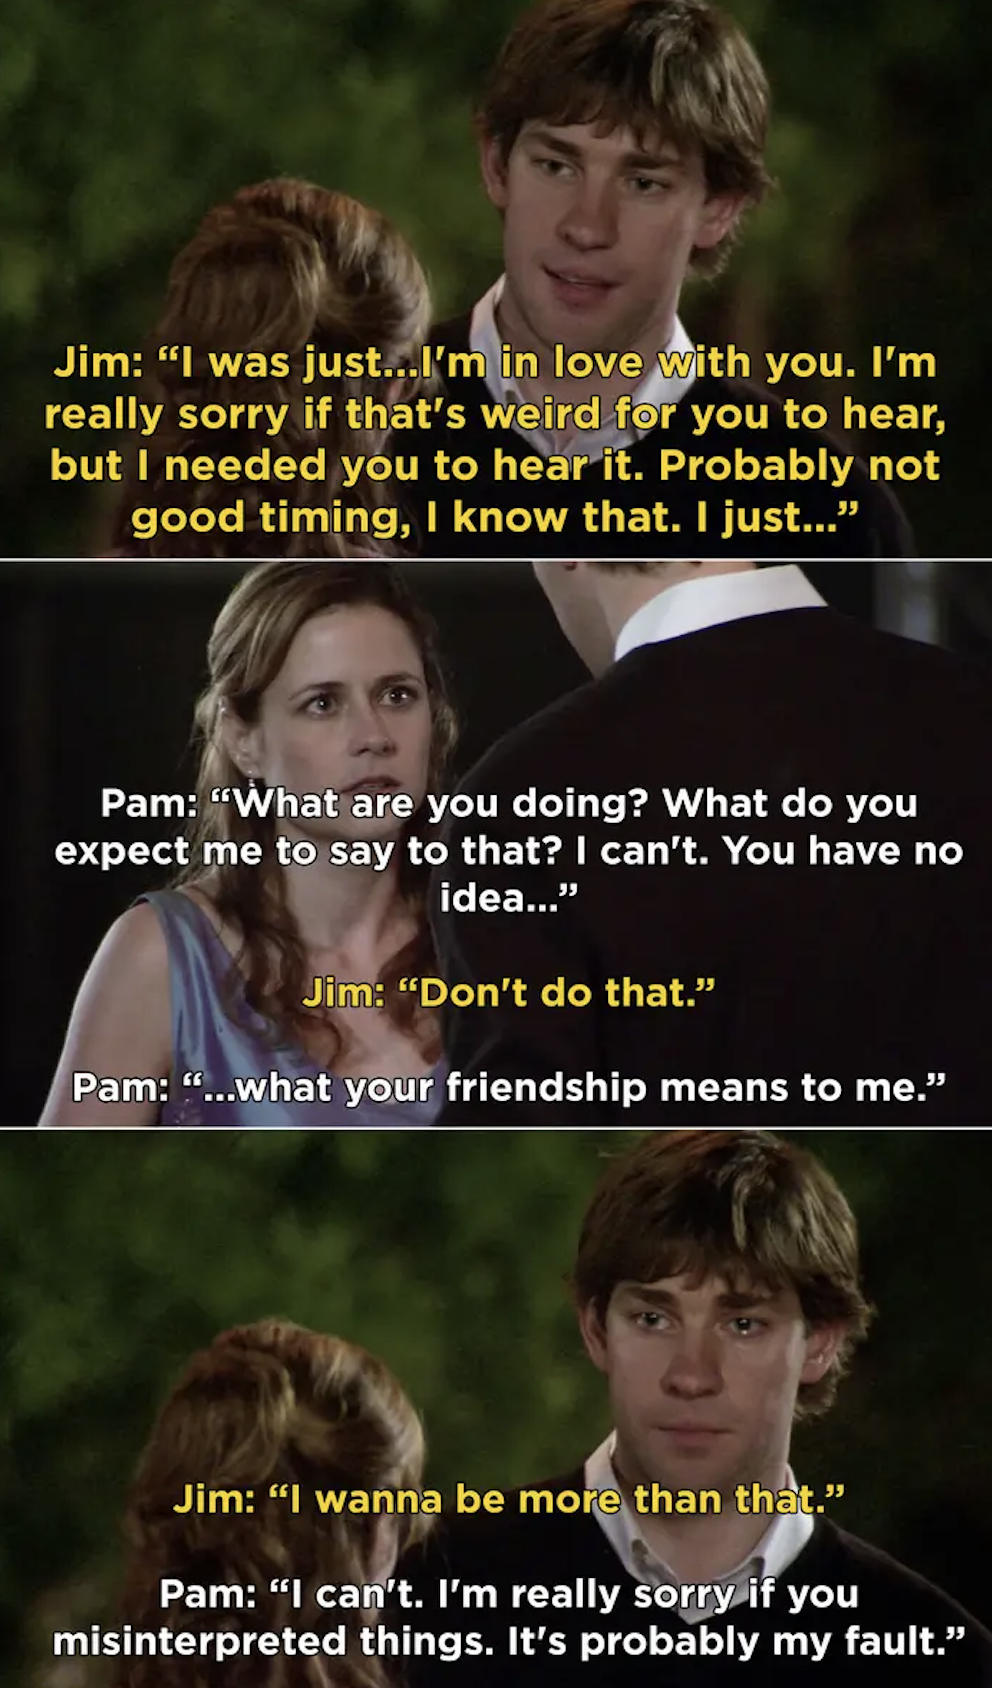 Jim:&quot;I&#x27;m in love with you. I&#x27;m really sorry if that&#x27;s weird for you to hear, but I needed you to hear it. Probably not good timing, I know that.&quot; Pam:&quot;What are you doing? What do you expect me to say to that?&quot;